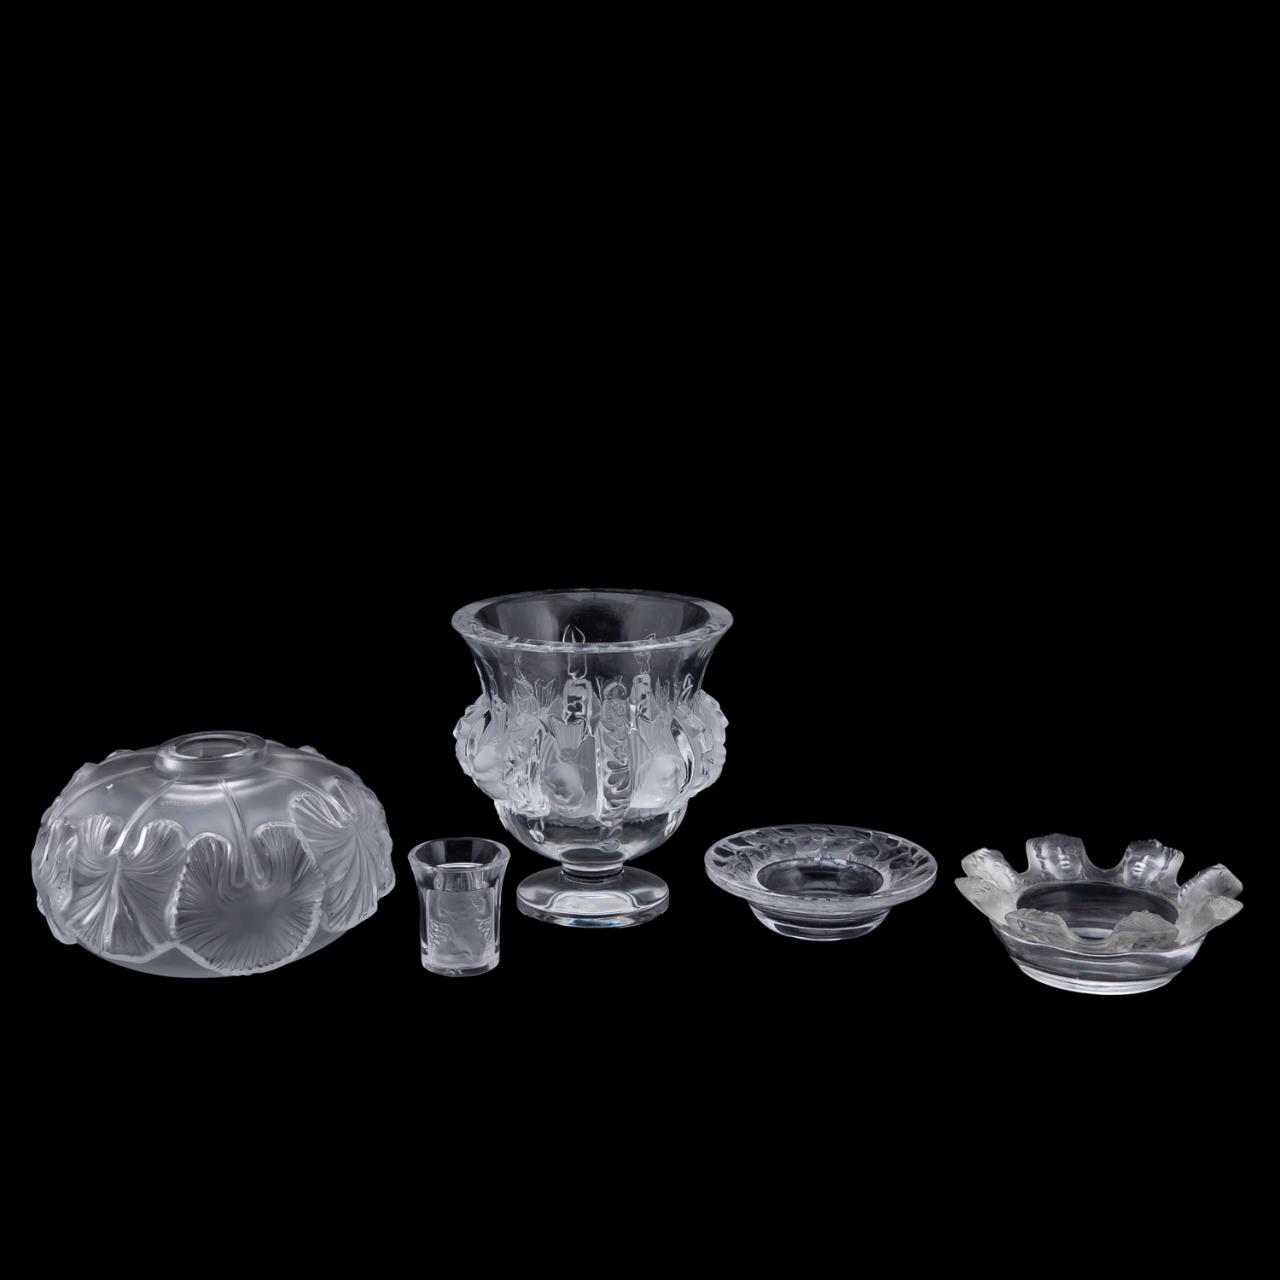 FIVE PIECES, LALIQUE FROSTED GLASS